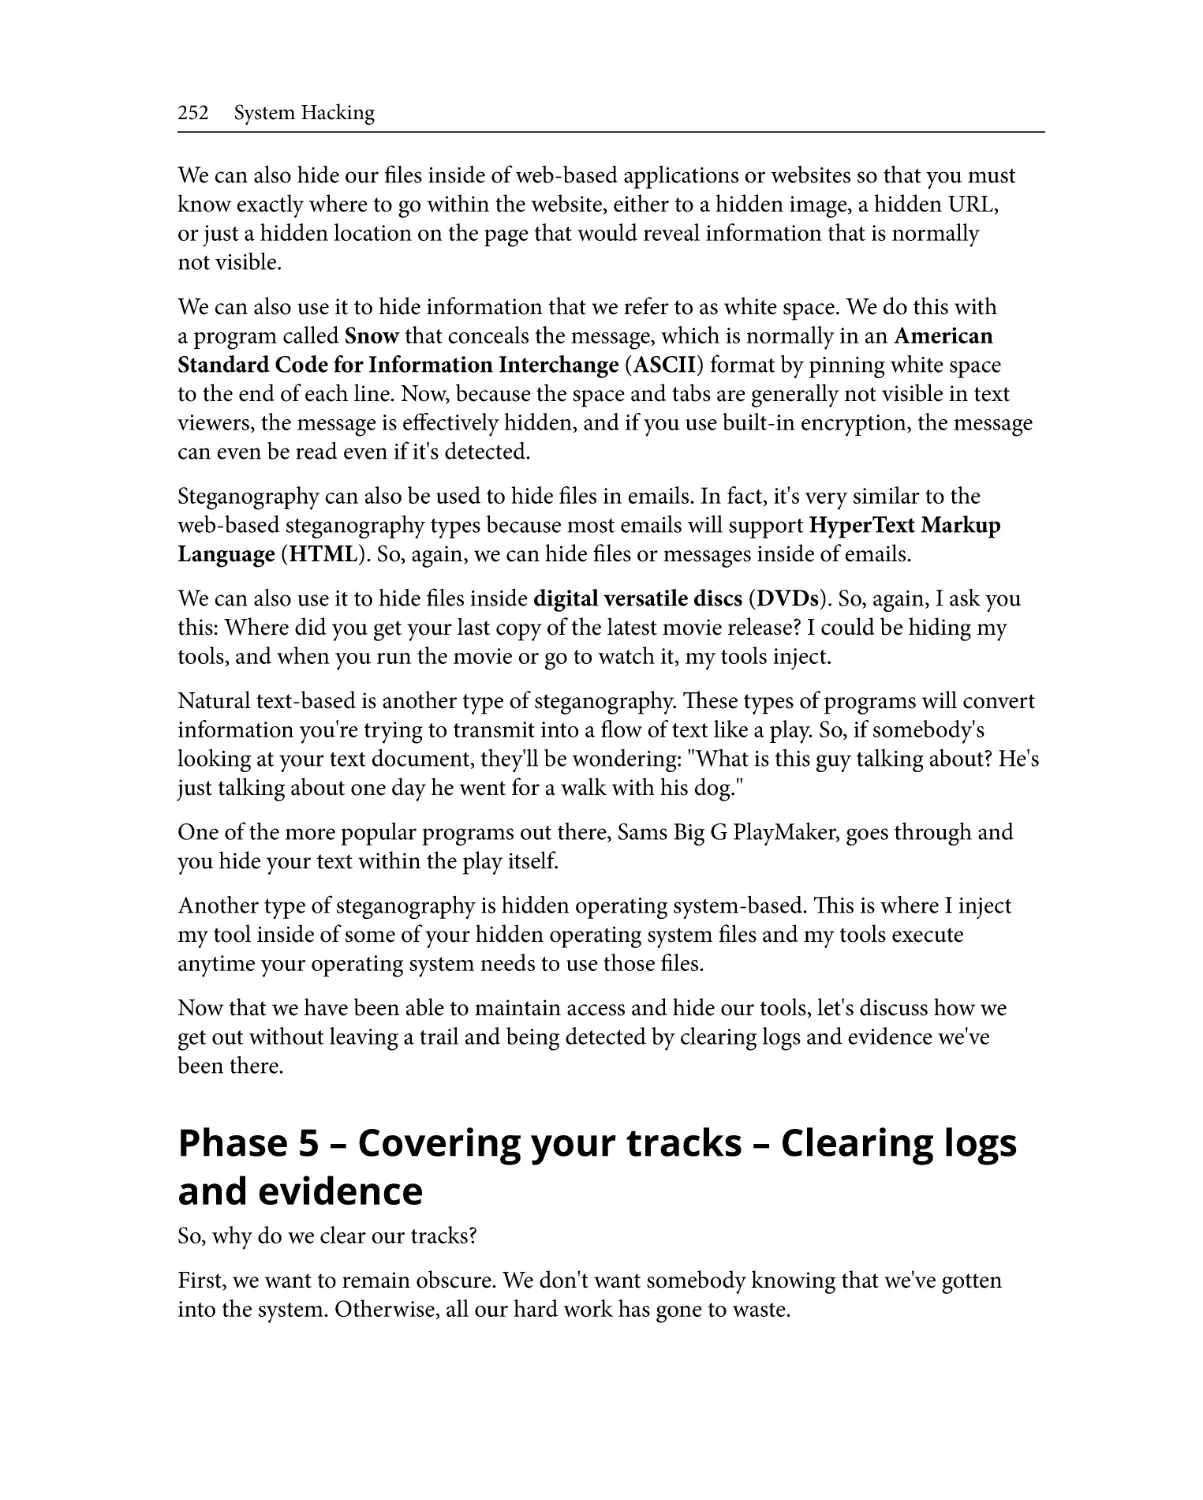 Phase 5 – Covering your tracks – Clearing logs and evidence